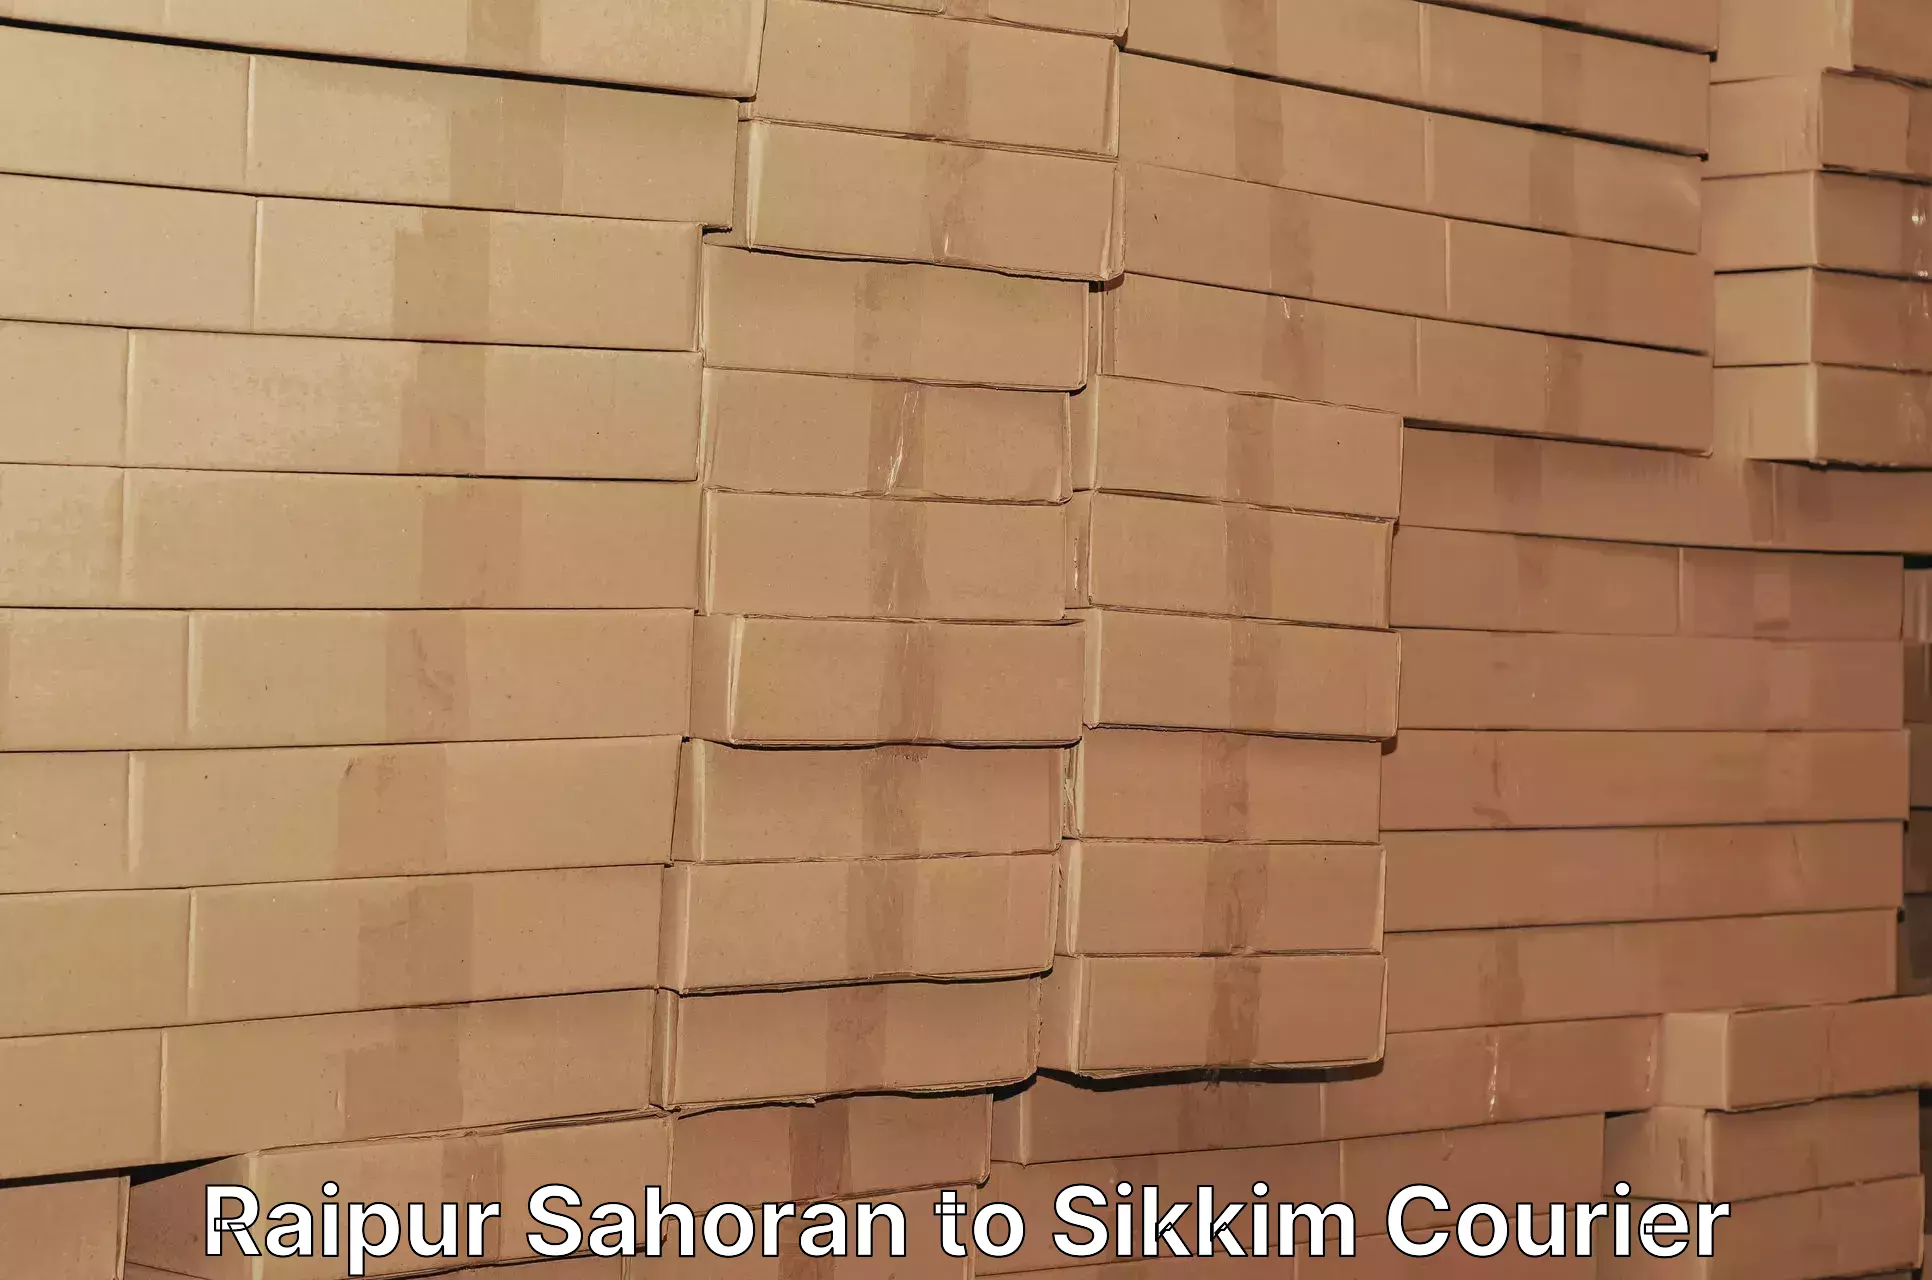 Automated parcel services Raipur Sahoran to South Sikkim